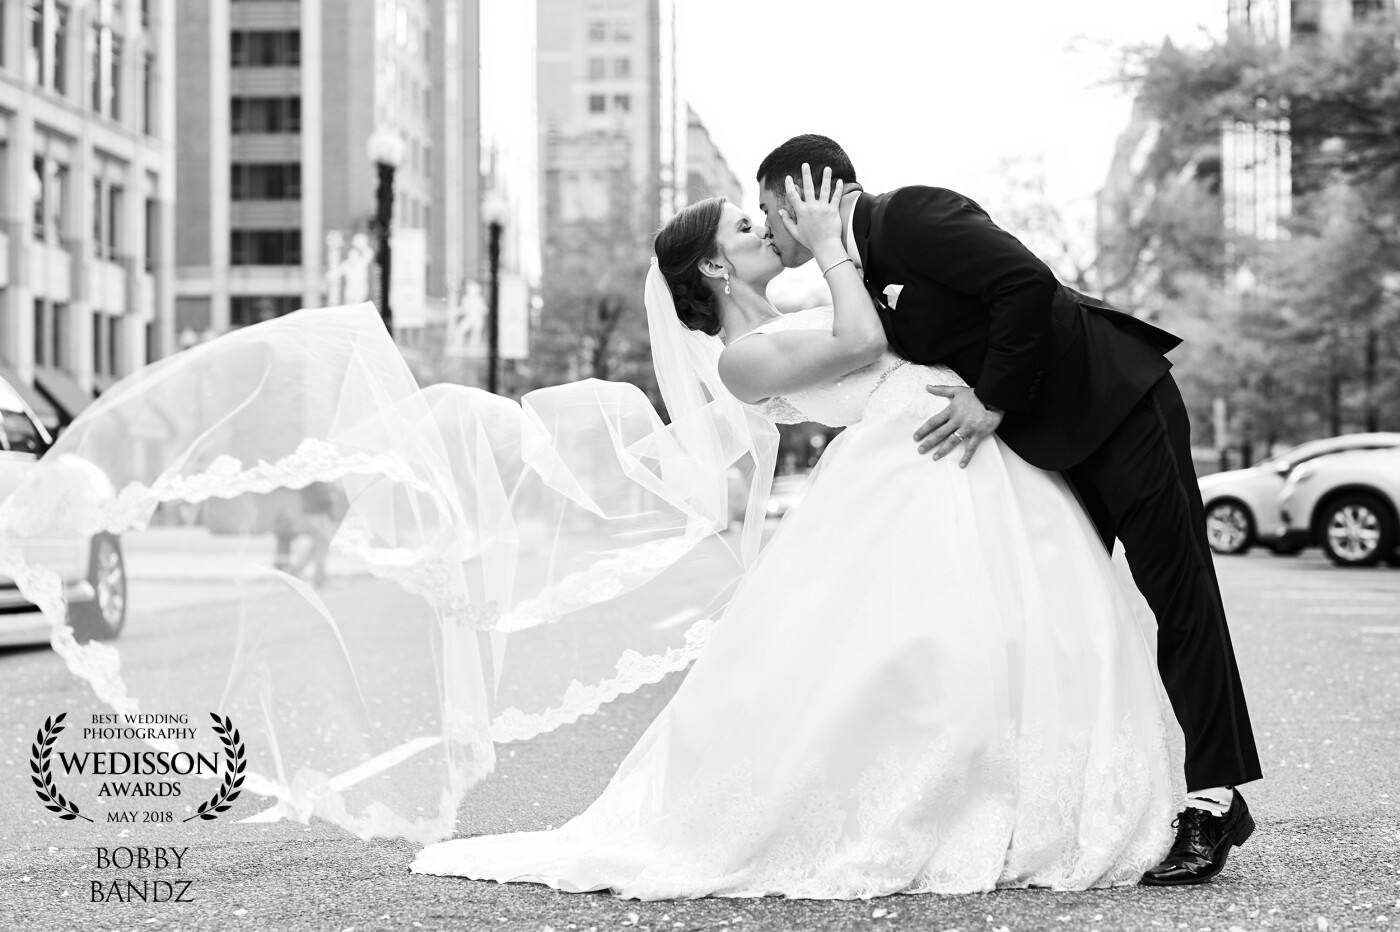 The streets of Washington DC are beautiful but always packed so when the moment came with no cars and no traffic the groom swept his wife off her feet and went in for a big kiss! I couldn’t pass this shot up! It was too perfect!